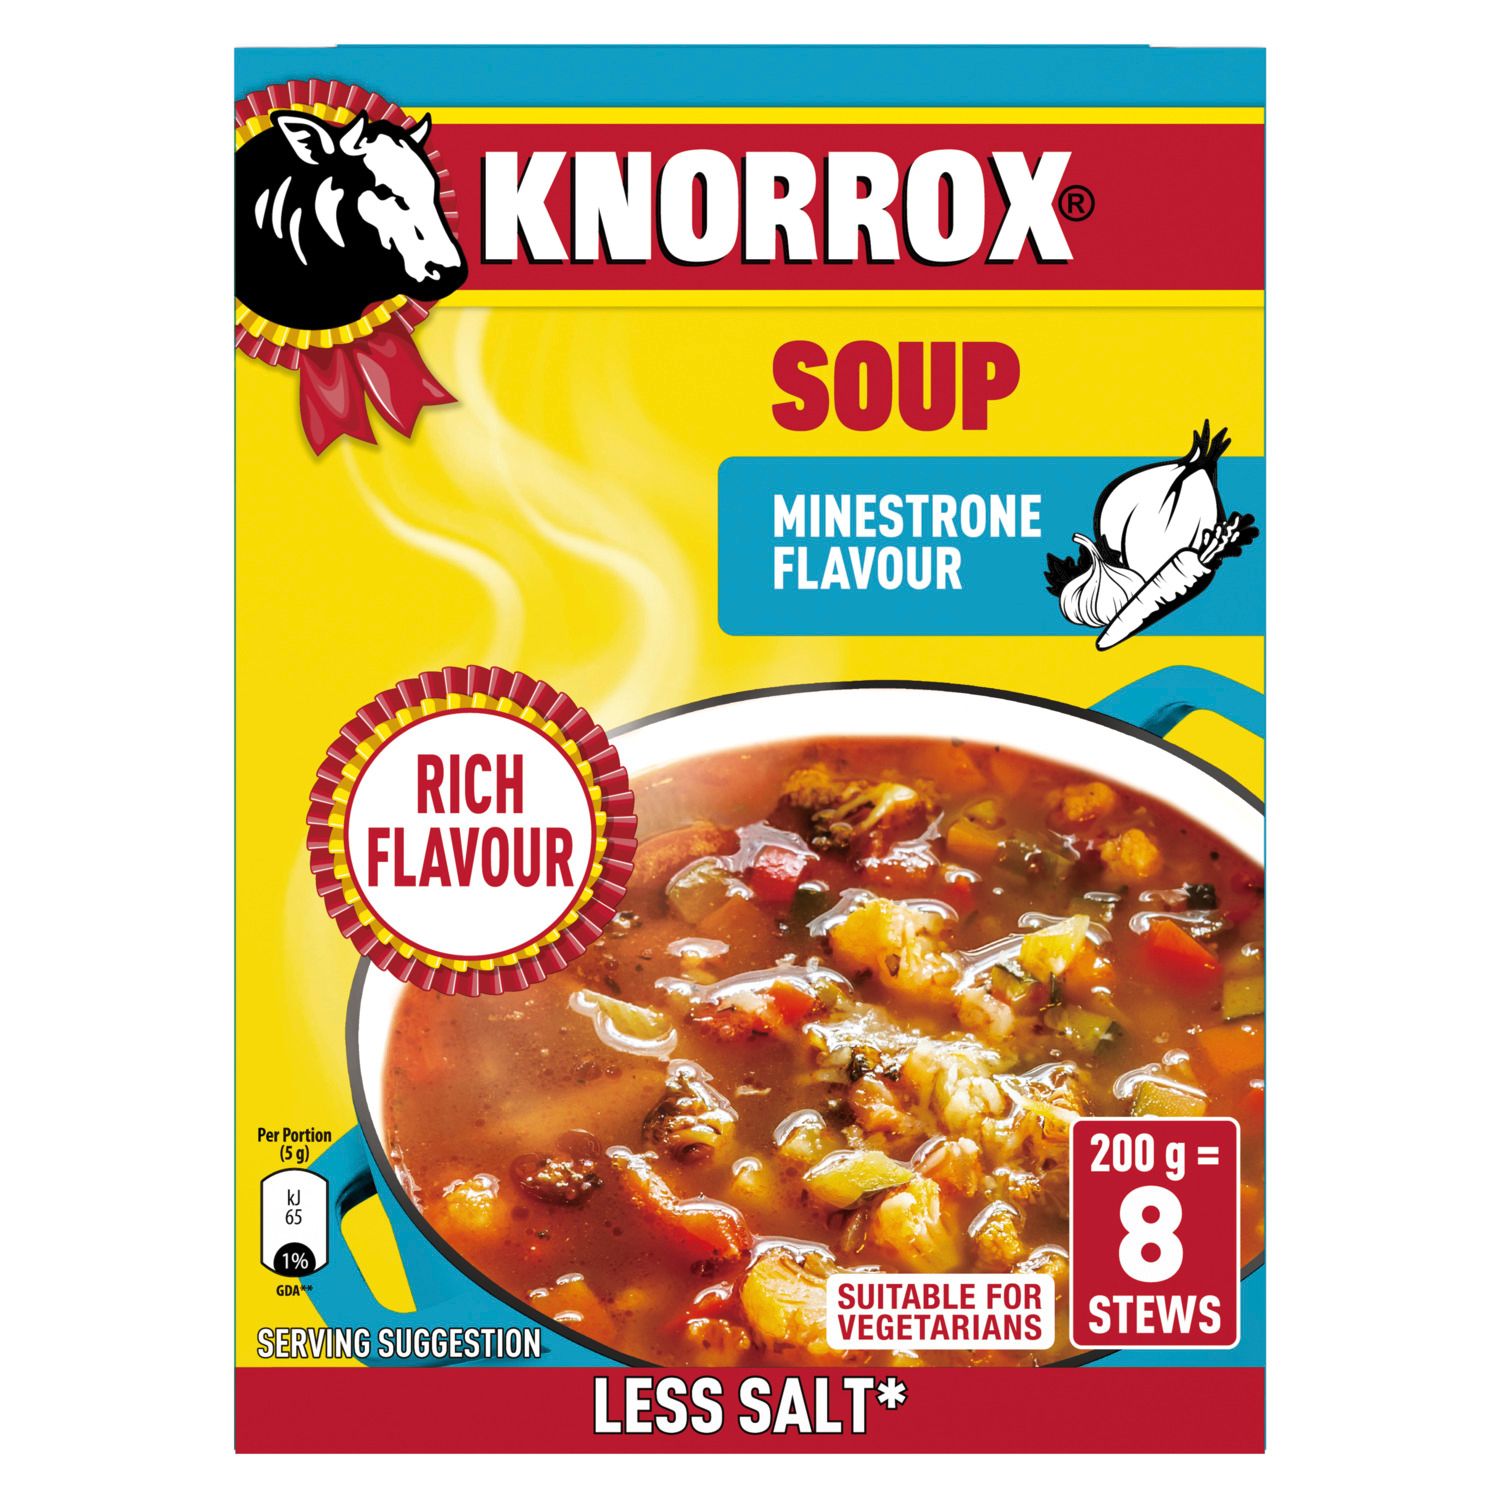 Knorrox Minestrone Soup 200g